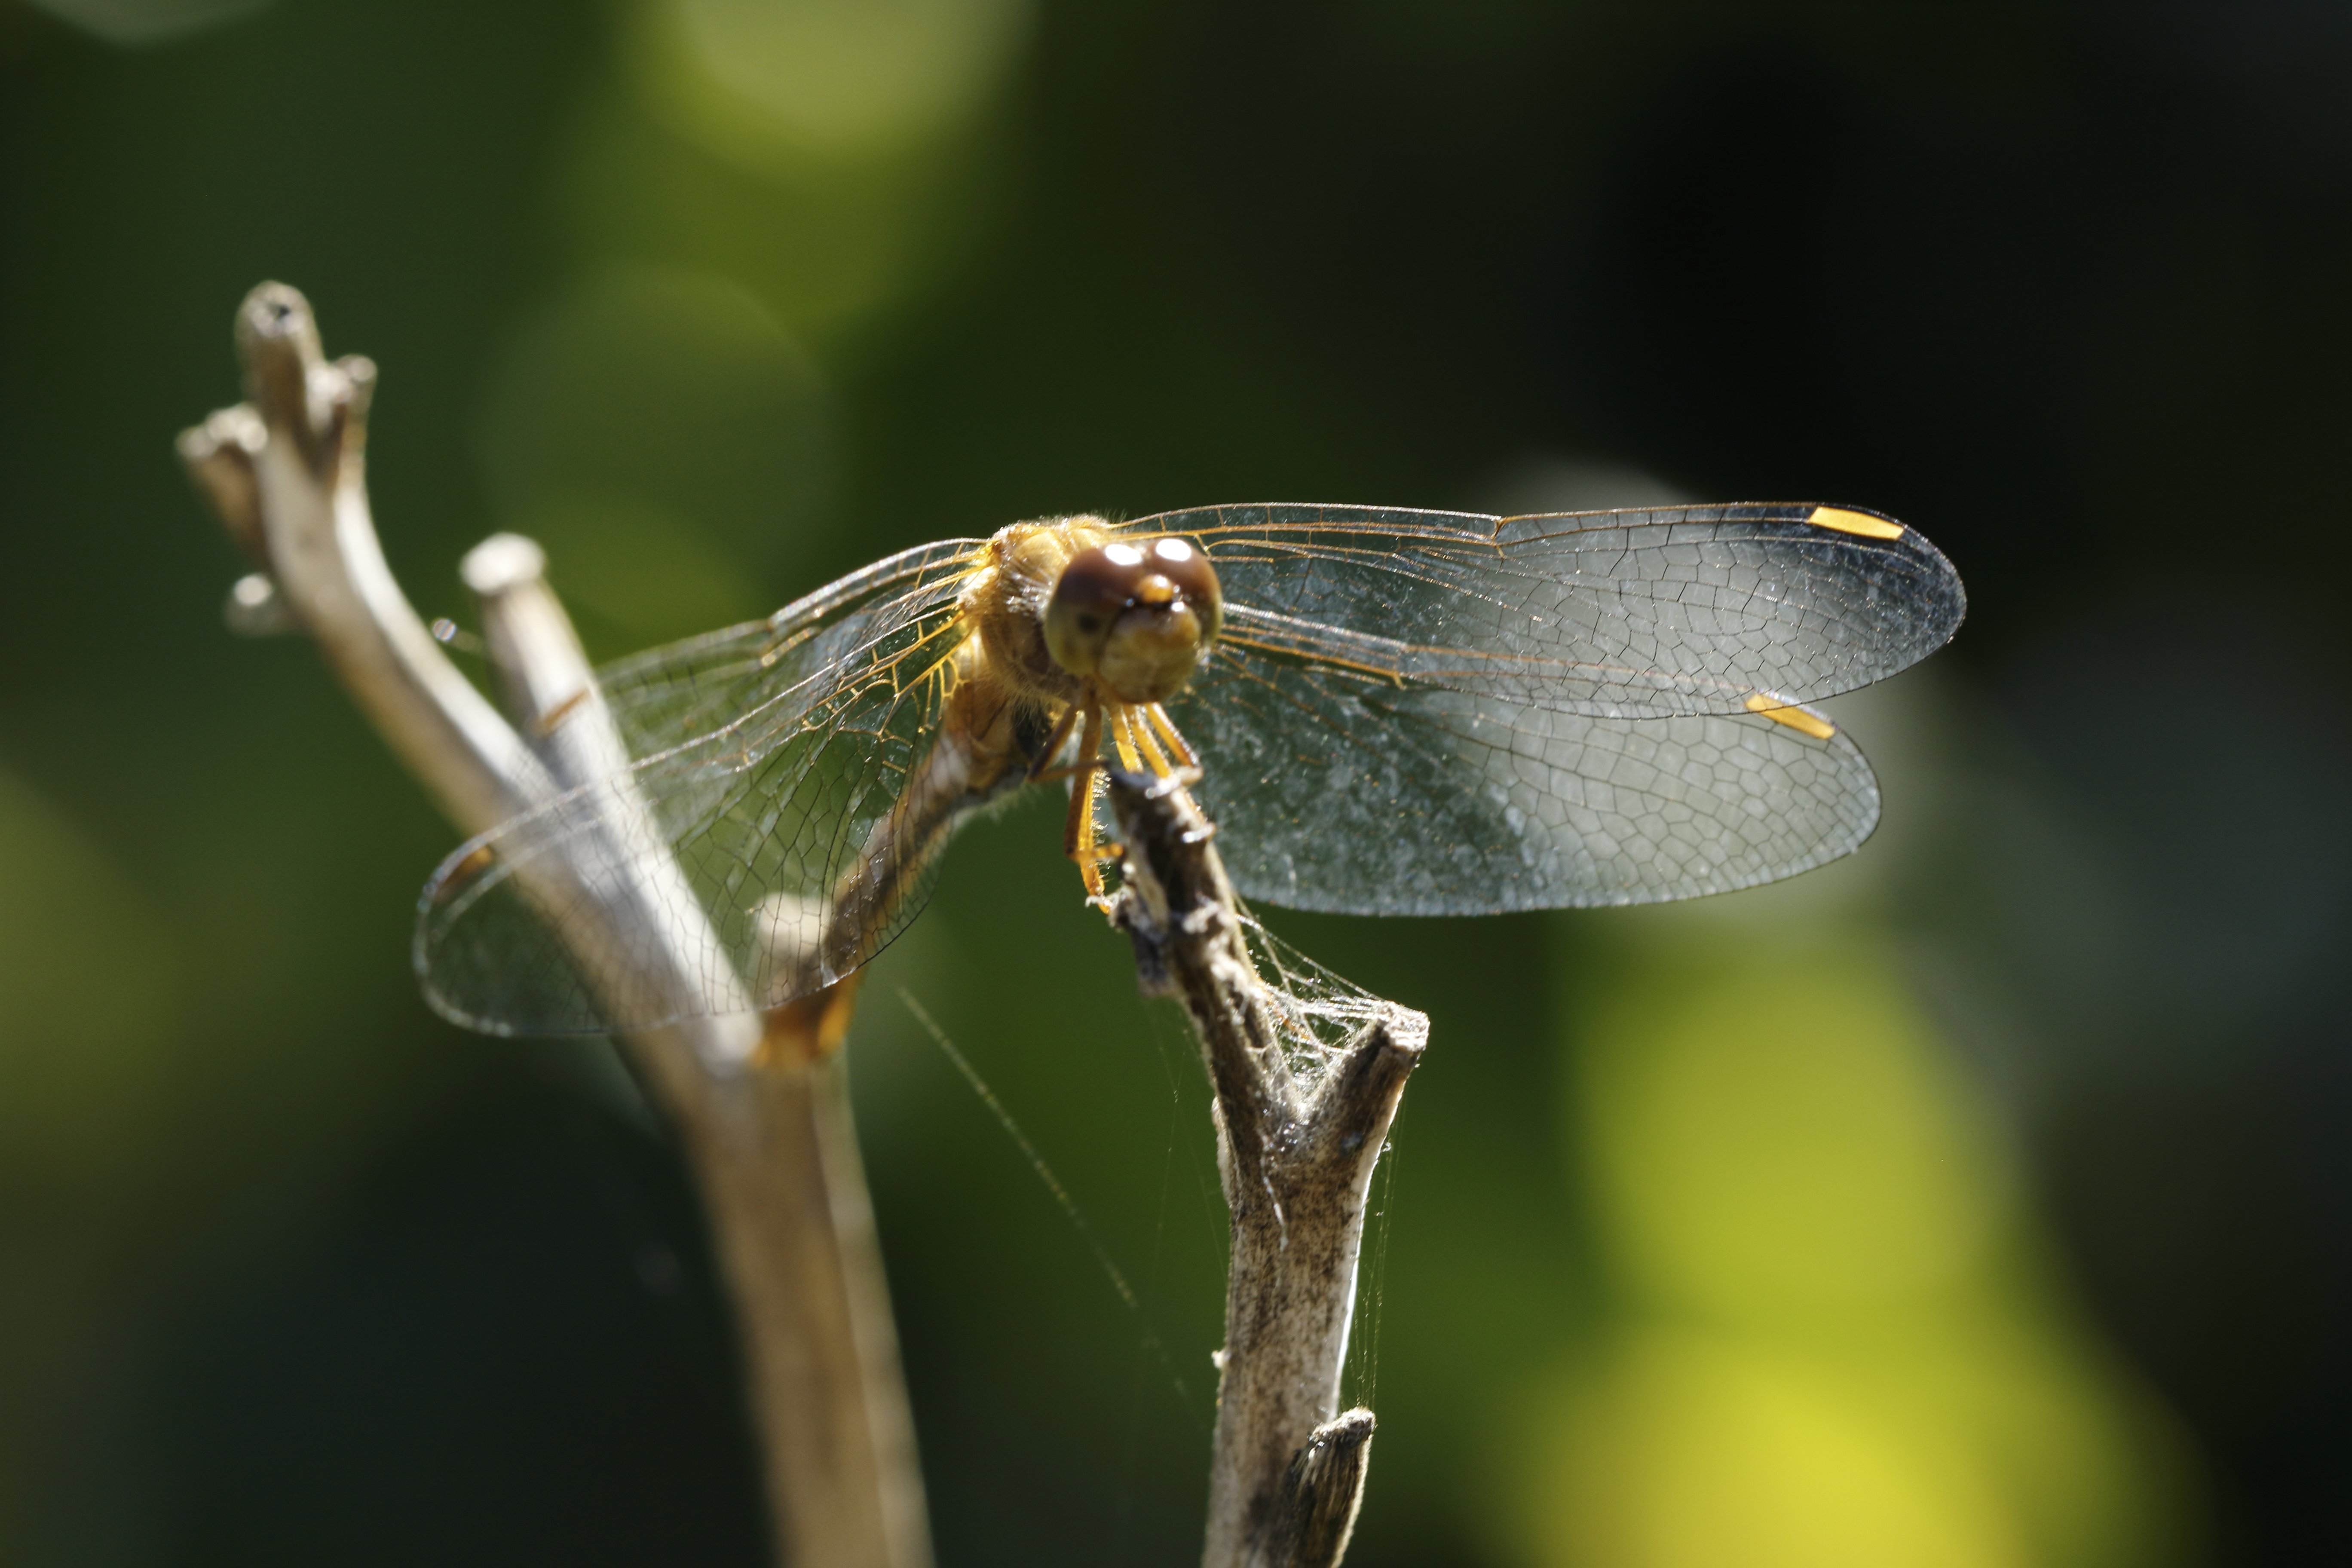 THE DRAGONFLY – WHAT IT IS/WHAT IT IS NOT